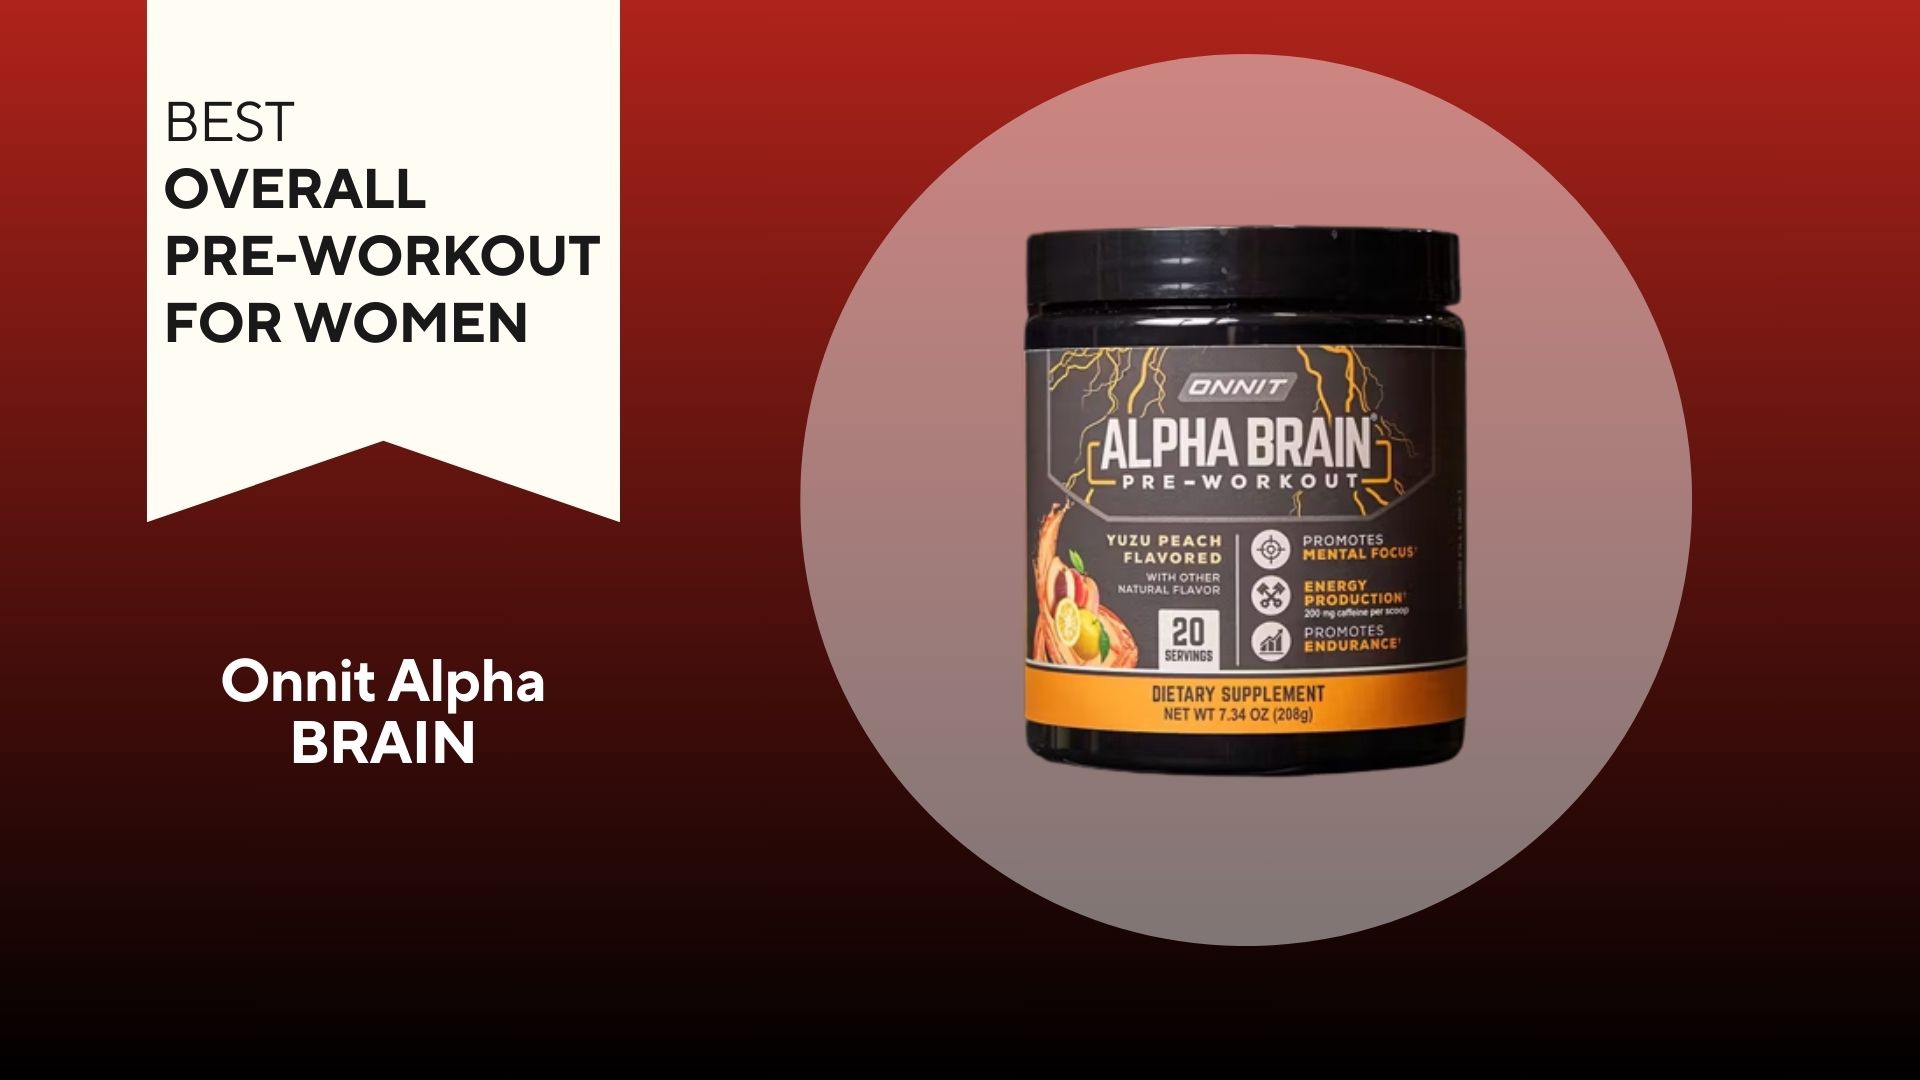 A red background with a white banner that says, "Best Overall Pre-Workout for Women" next to a black and orange container that says Onnit Alpha Brain Pre-Workout in white font